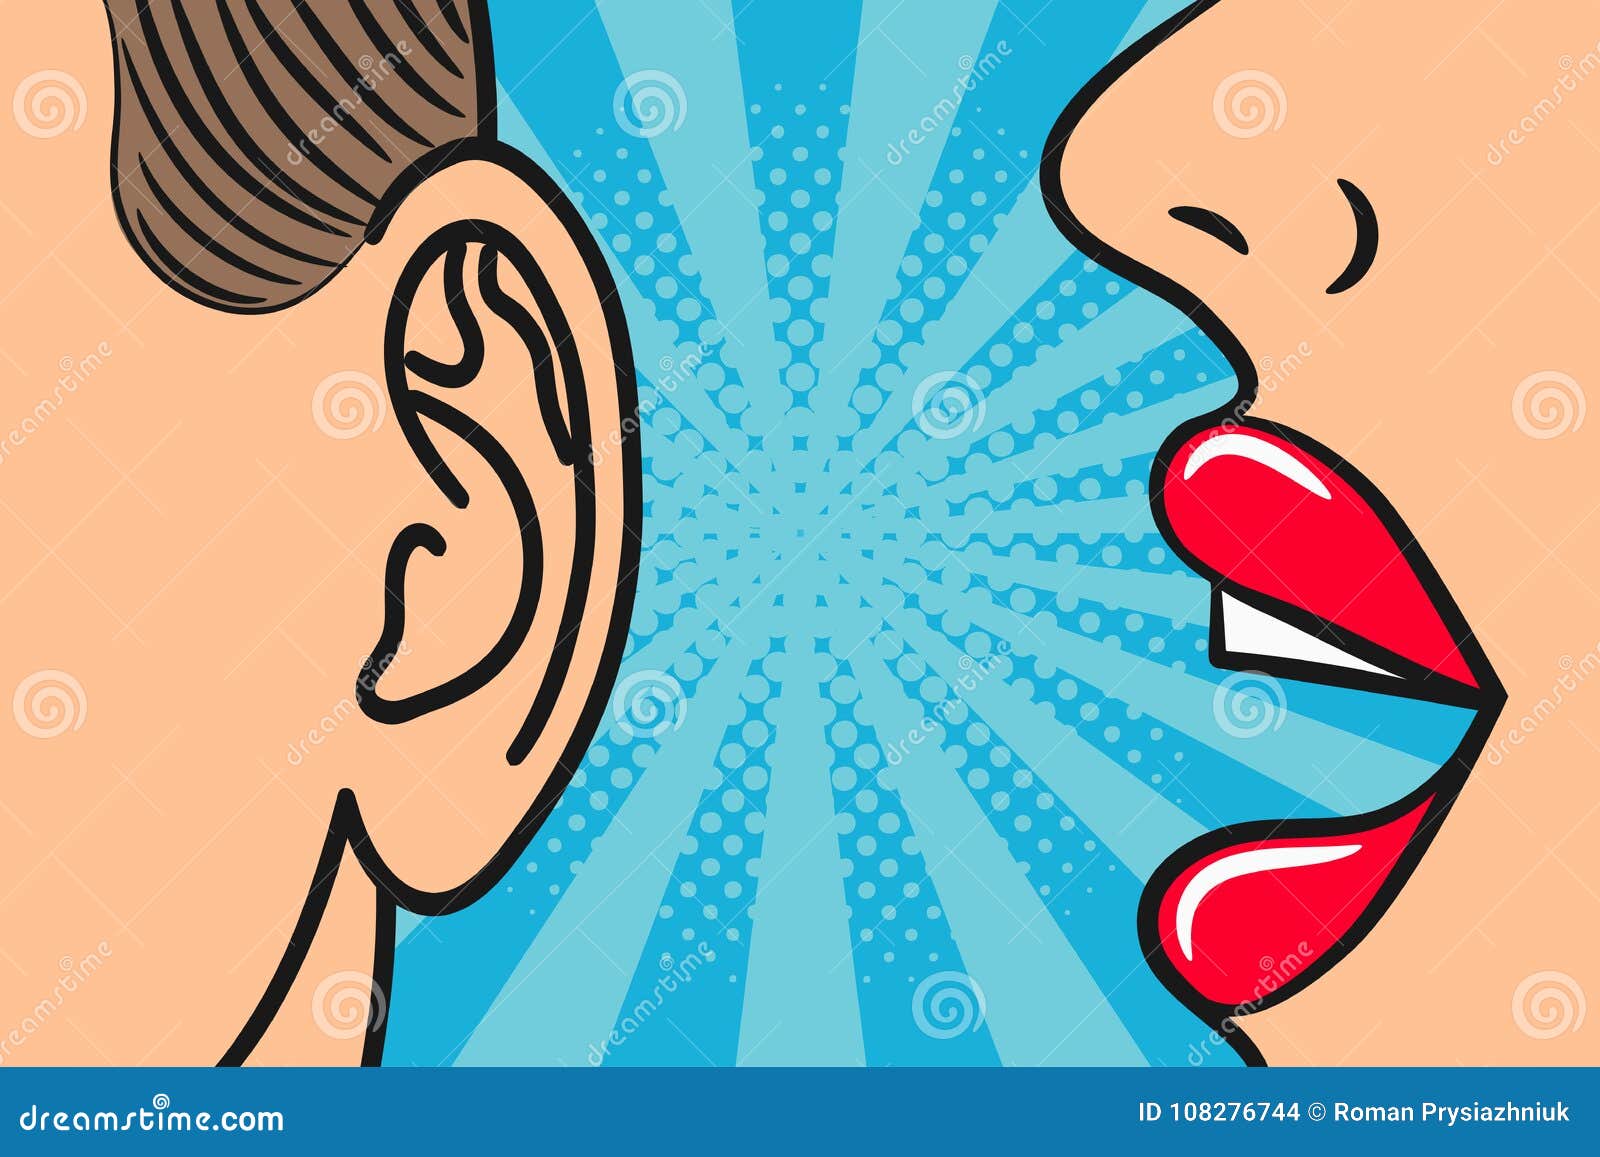 woman lips whispering in mans ear with speech bubble. pop art style, comic book . secrets and gossip concept.